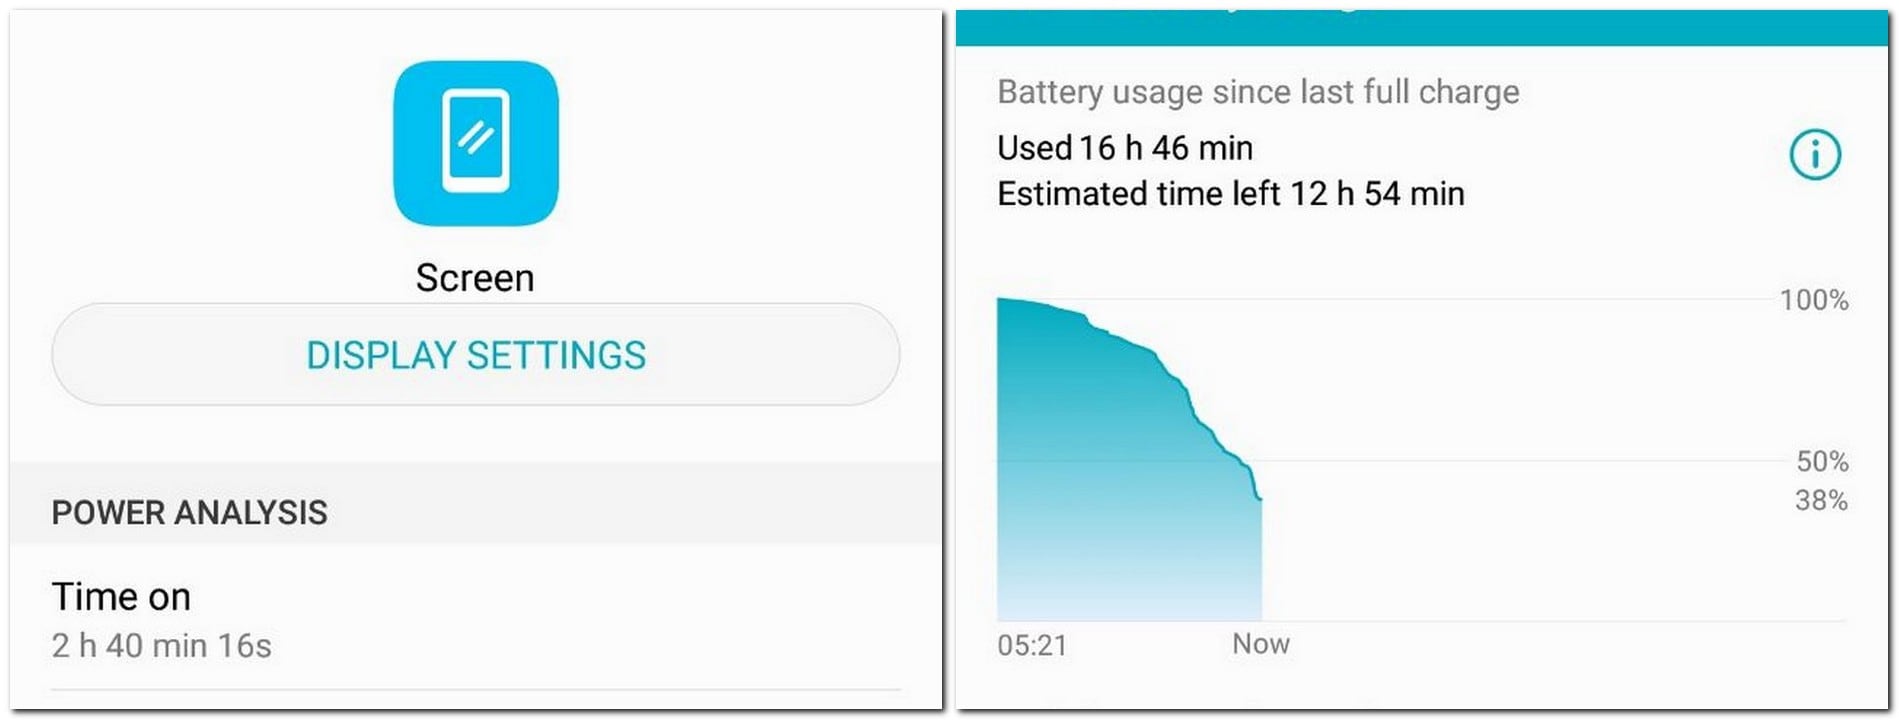 This is the usage after the phone being fully charged early morning and the screenshot taken at 10 pm